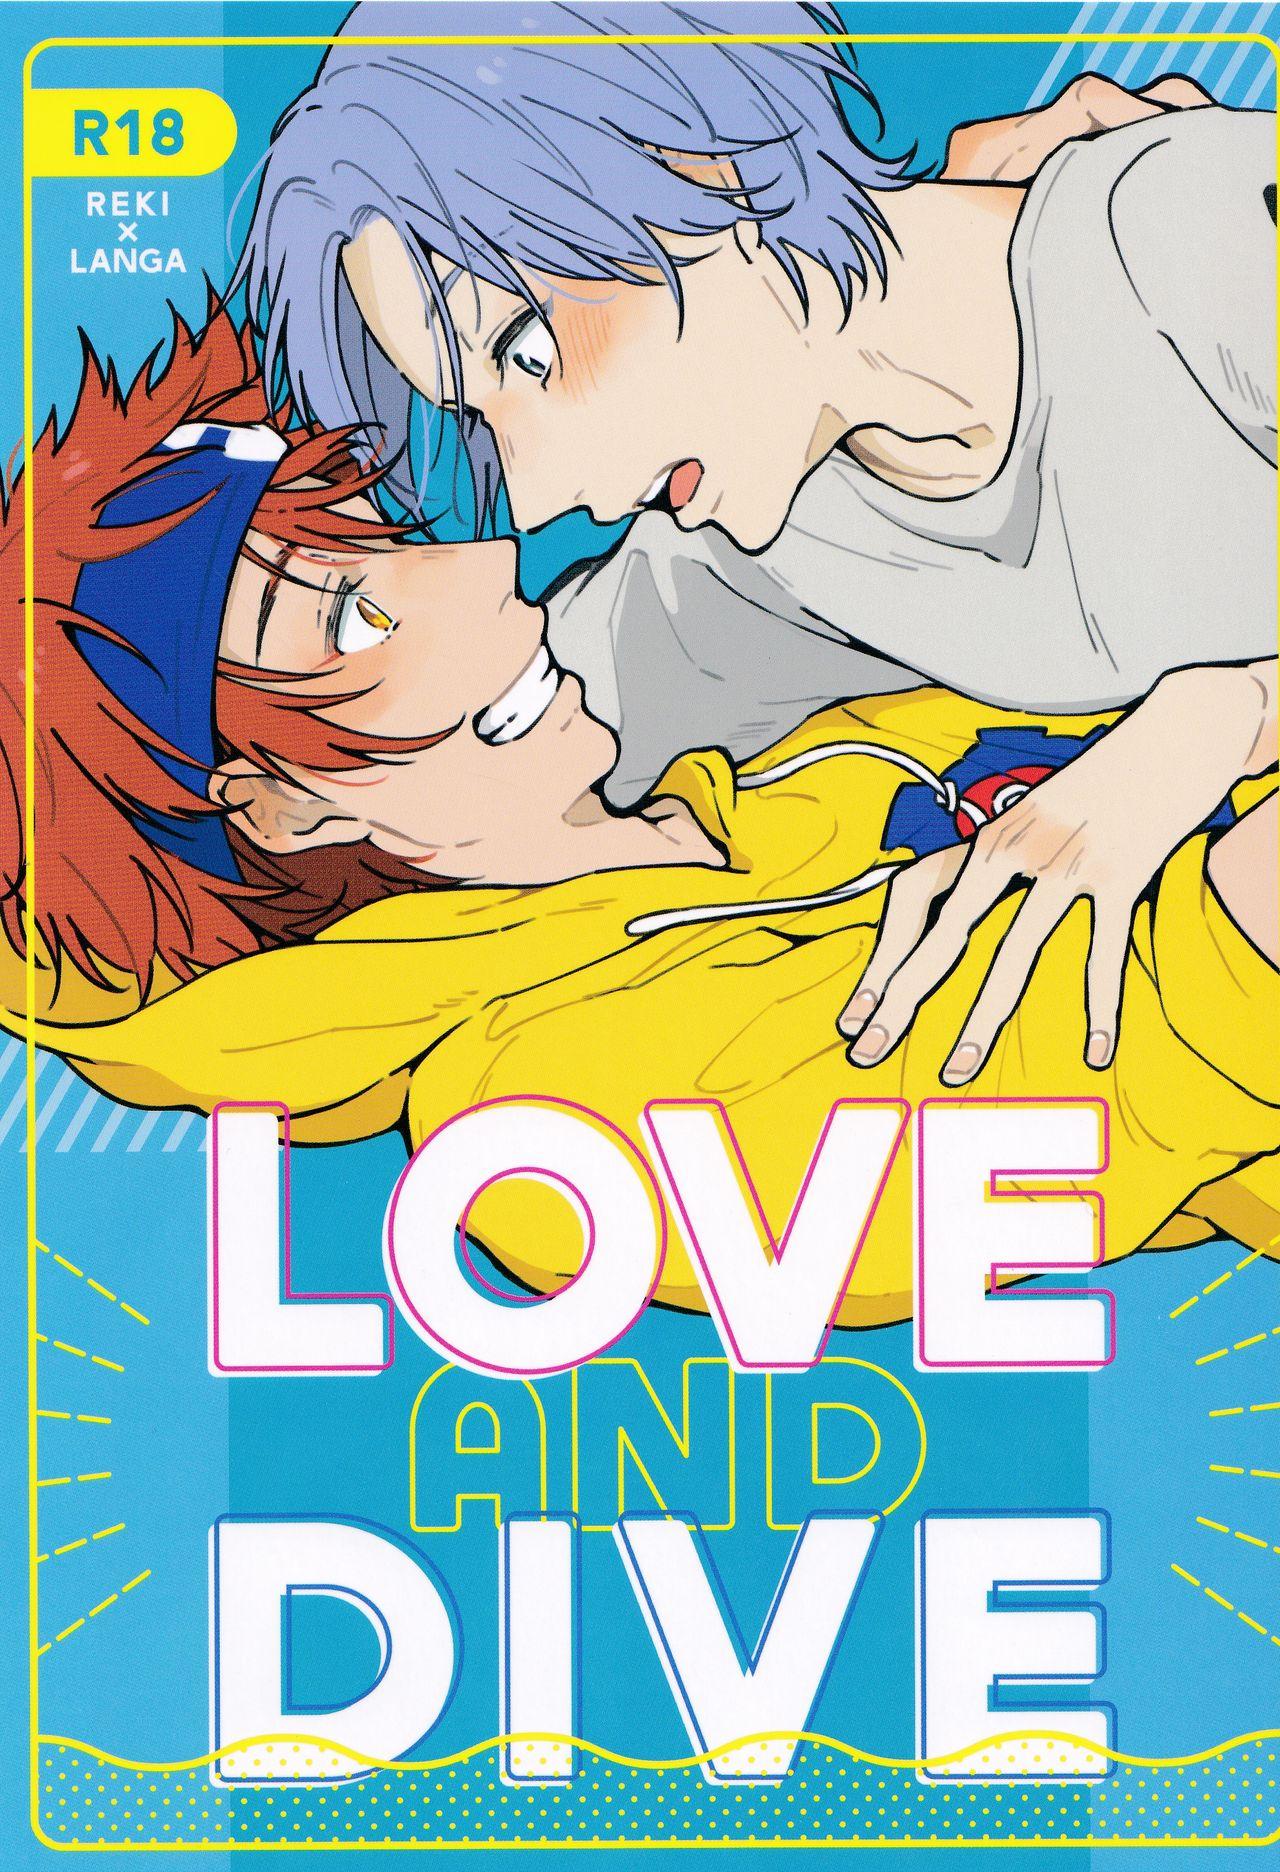 LOVE AND DIVE 0